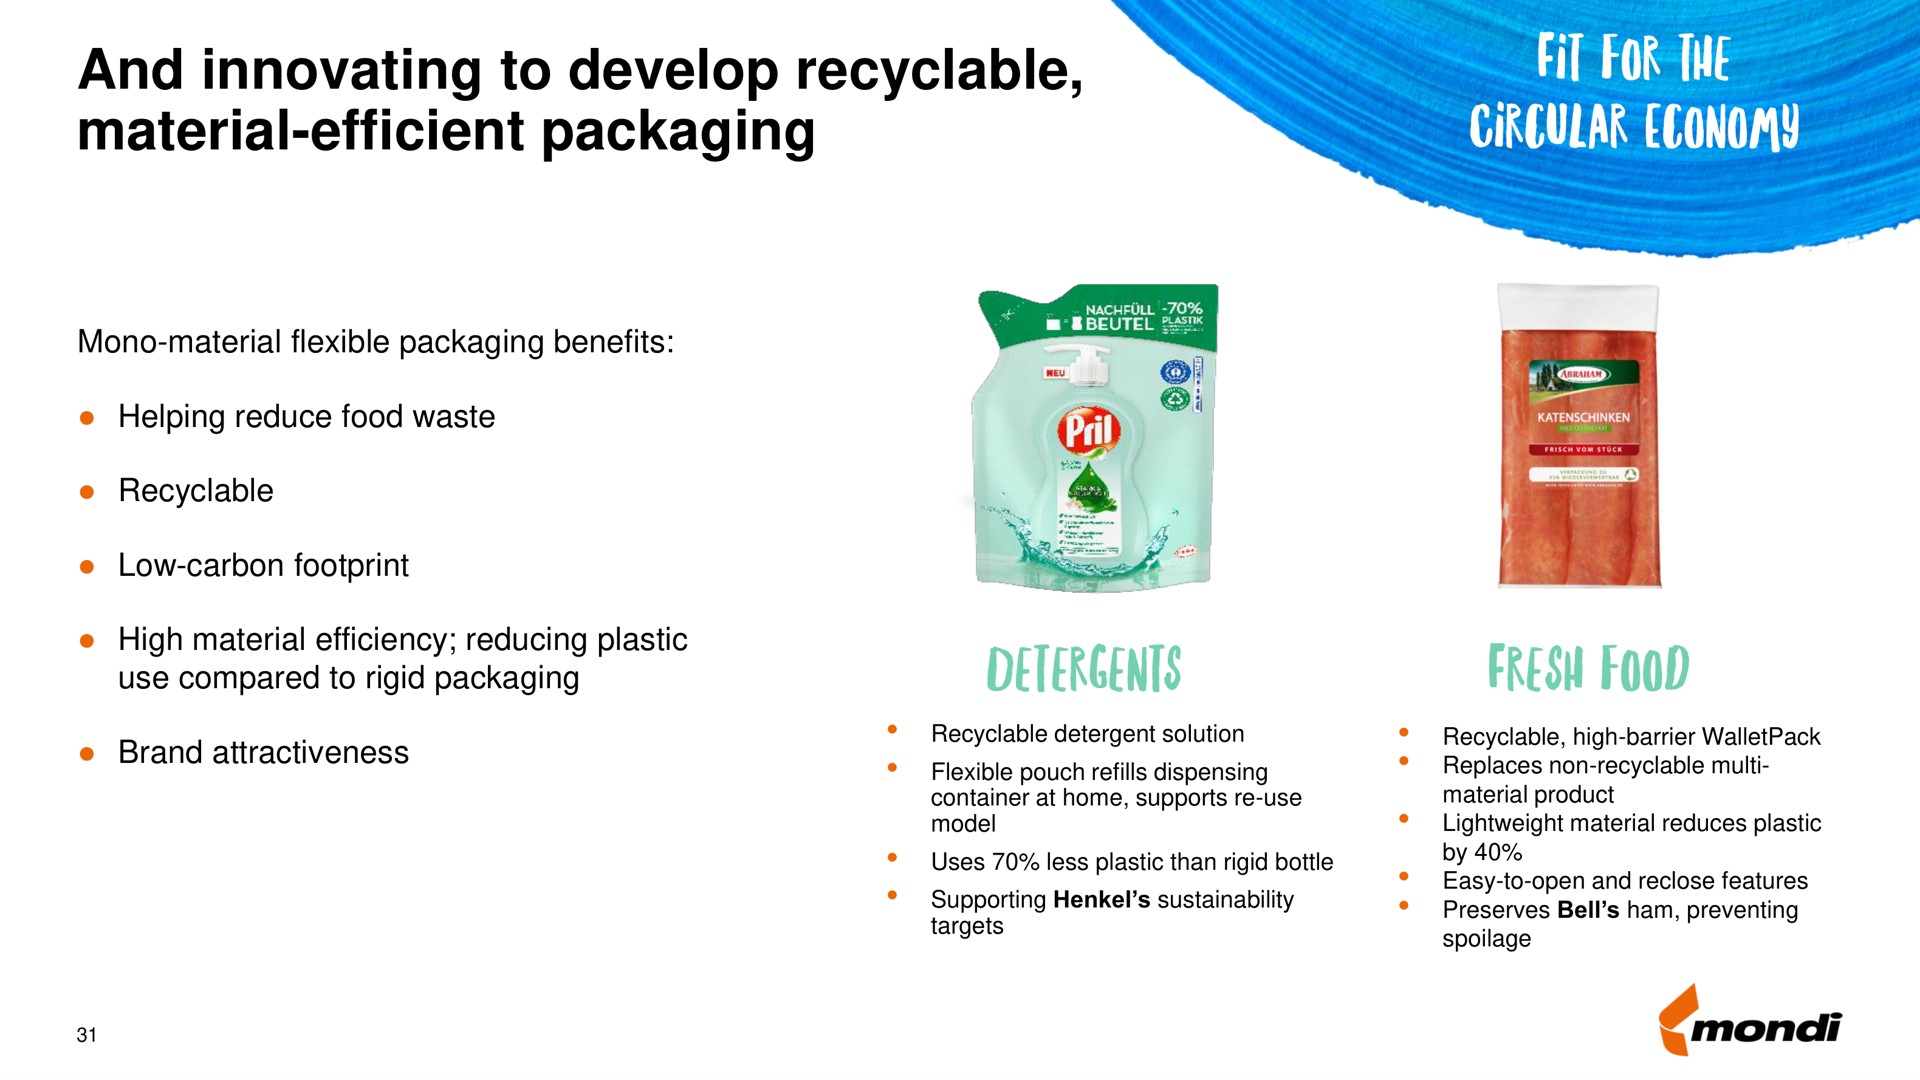 and innovating to develop material efficient packaging sas | Mondi